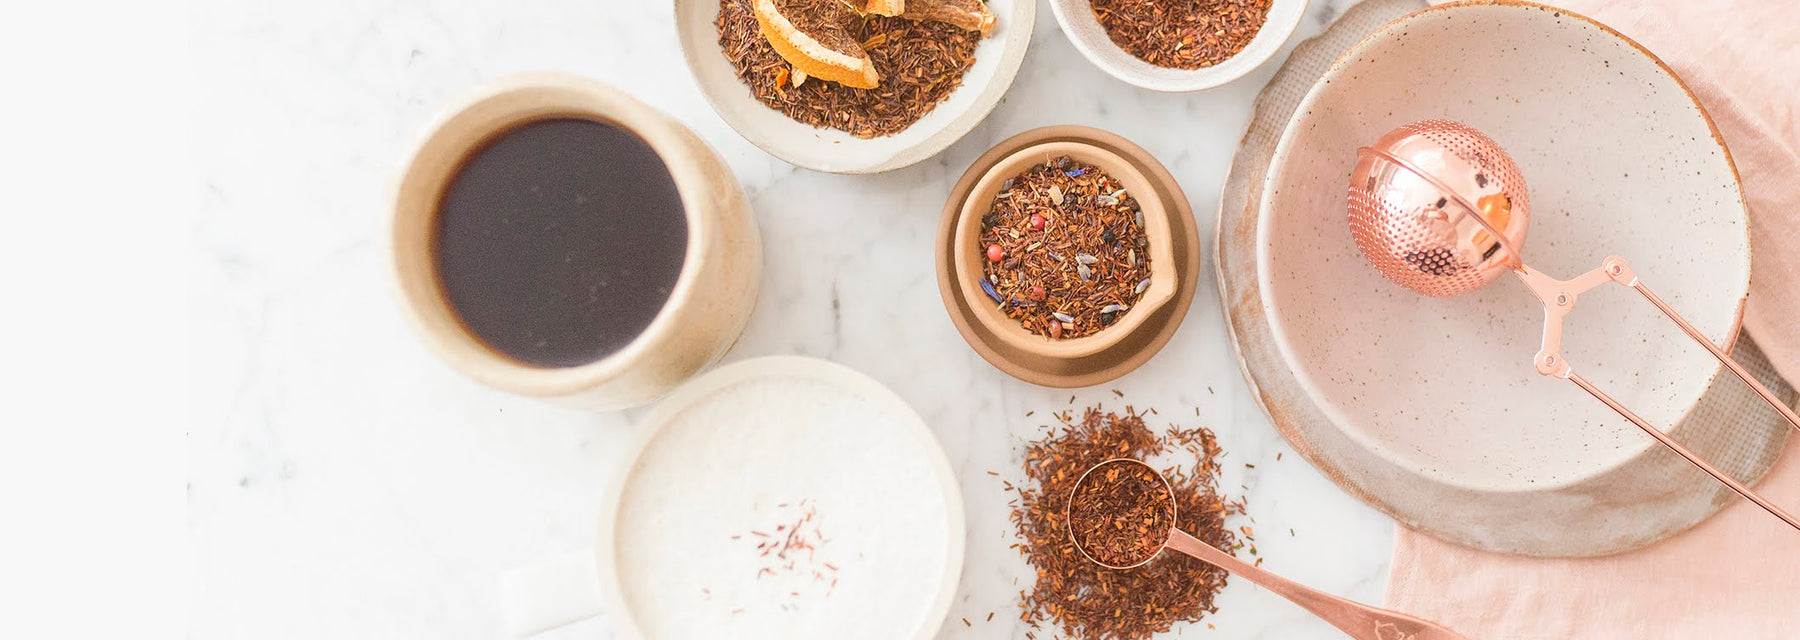 Green Rooibos vs. Red Rooibos: What's the Difference?